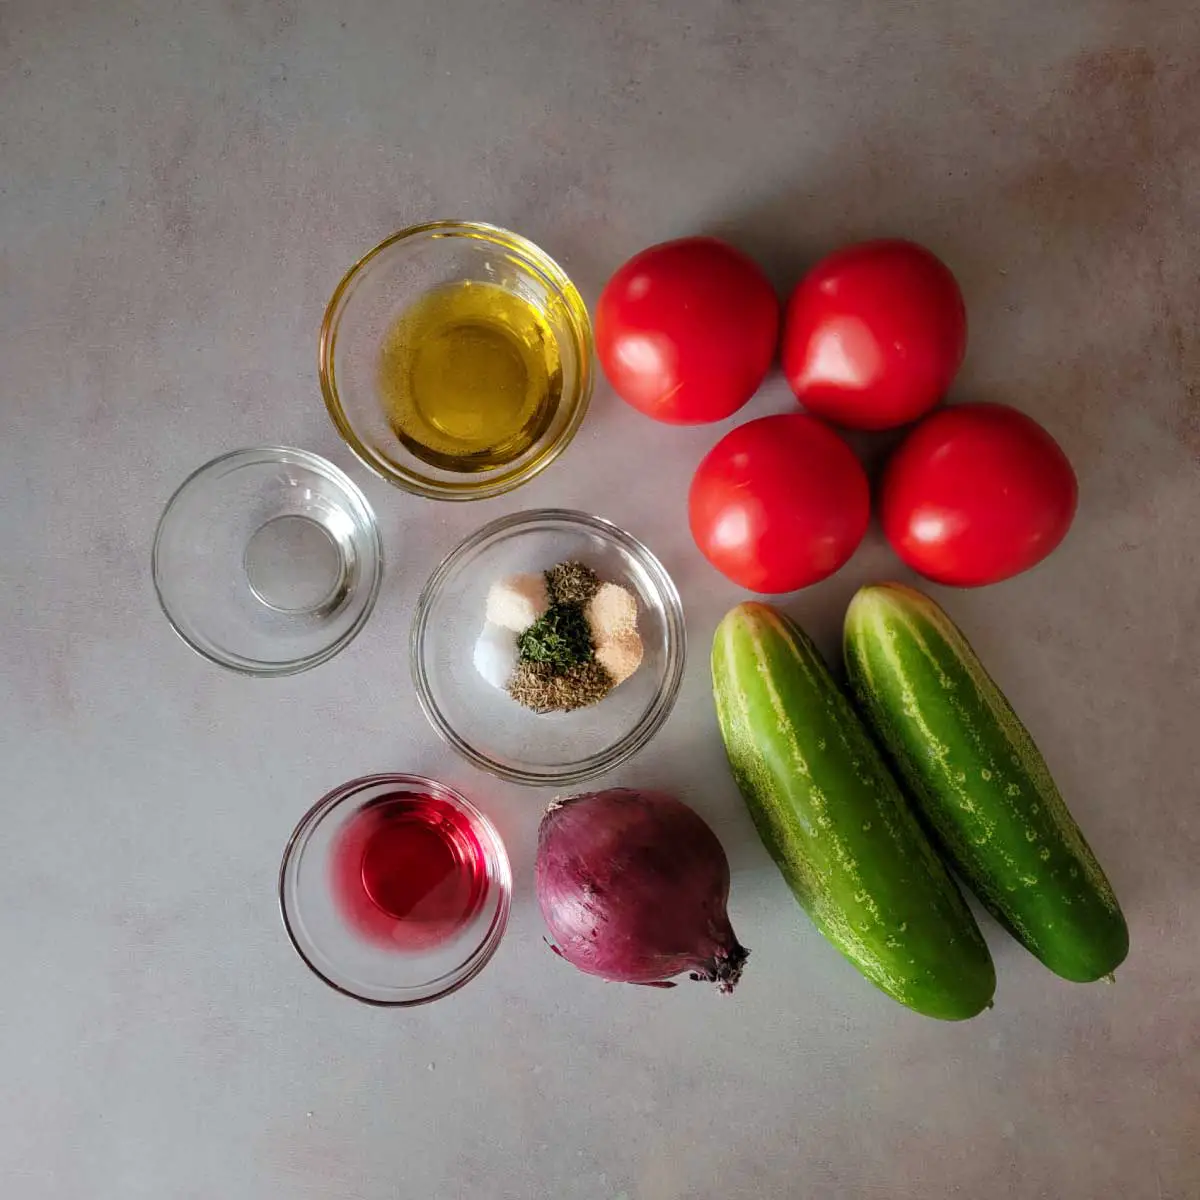 Ingredients prepped for the cucumber tomato salad.